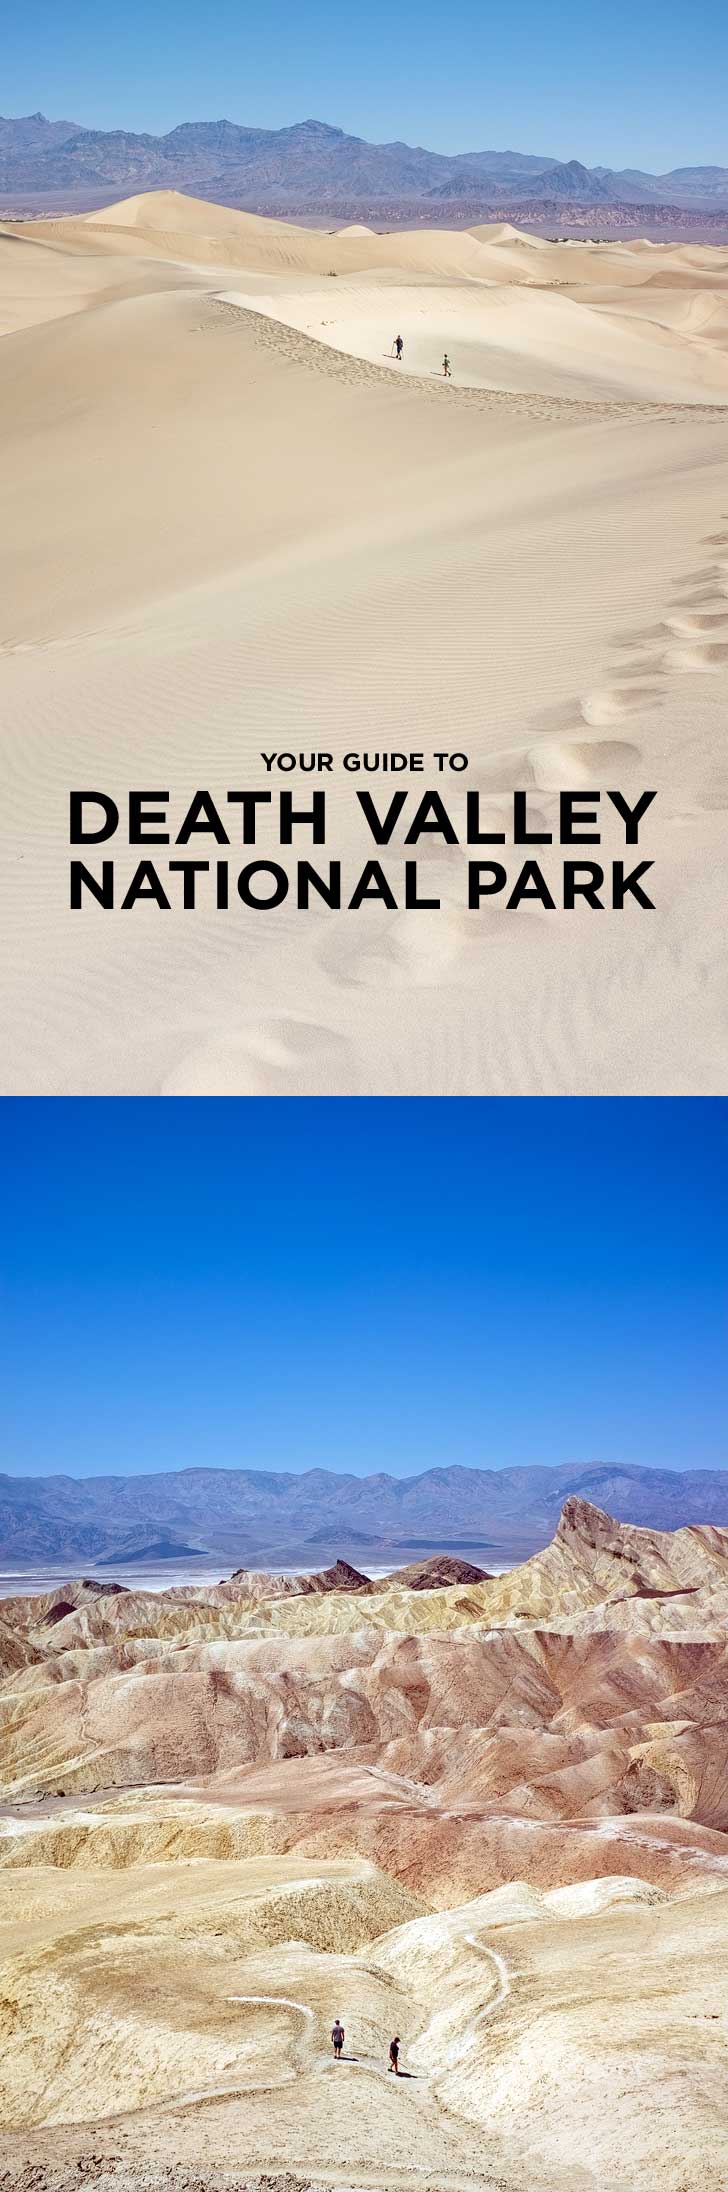 9 Incredible Things to Do in Death Valley National Park California // localadventurer.com